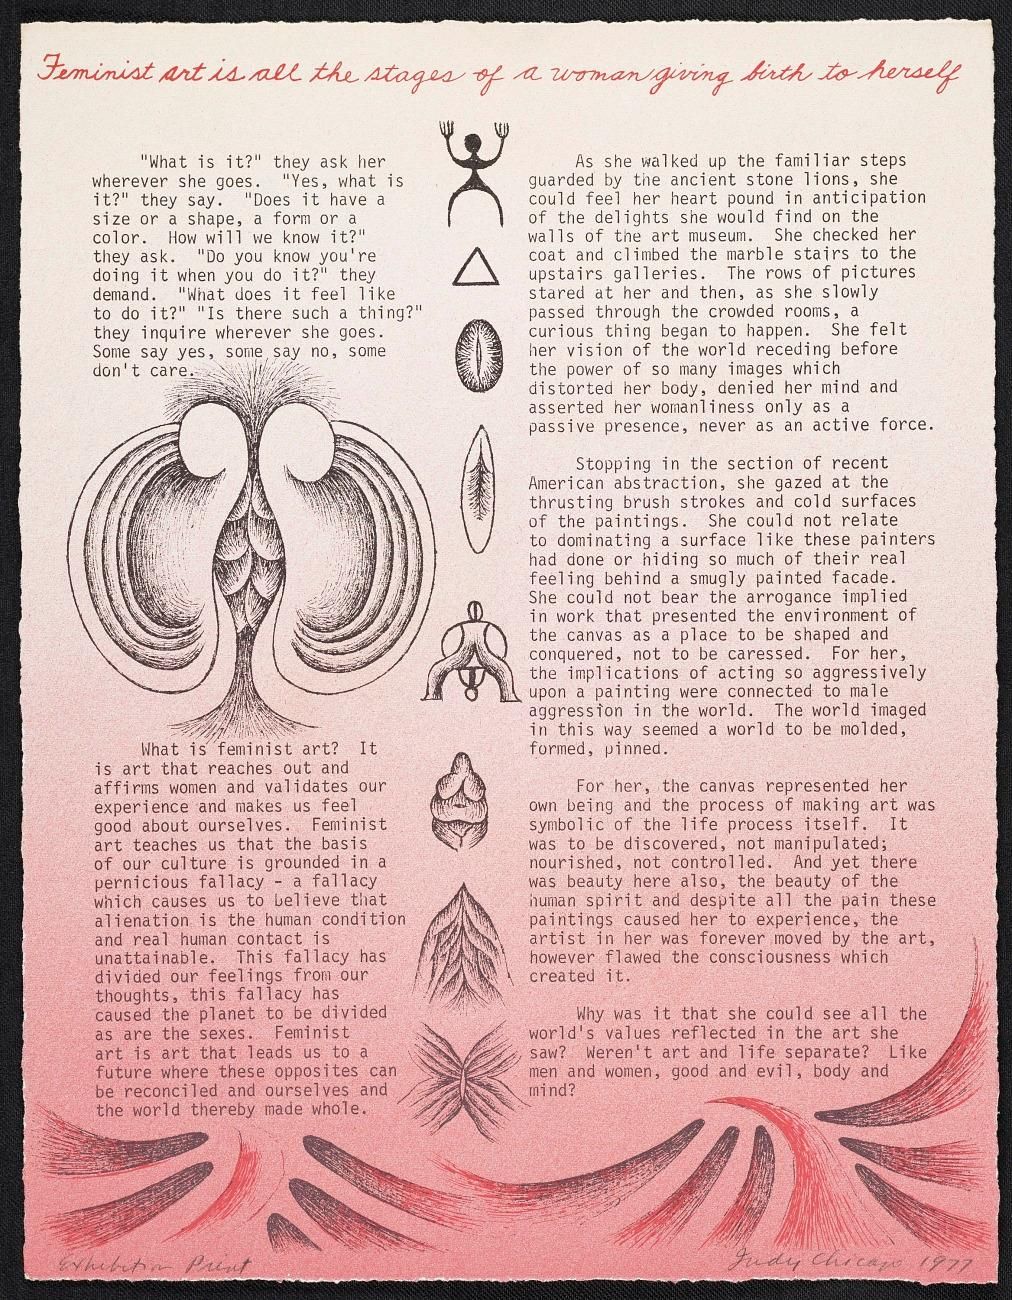 Pink paper with vulvic imagery and text about feminist art by Judy Chicago